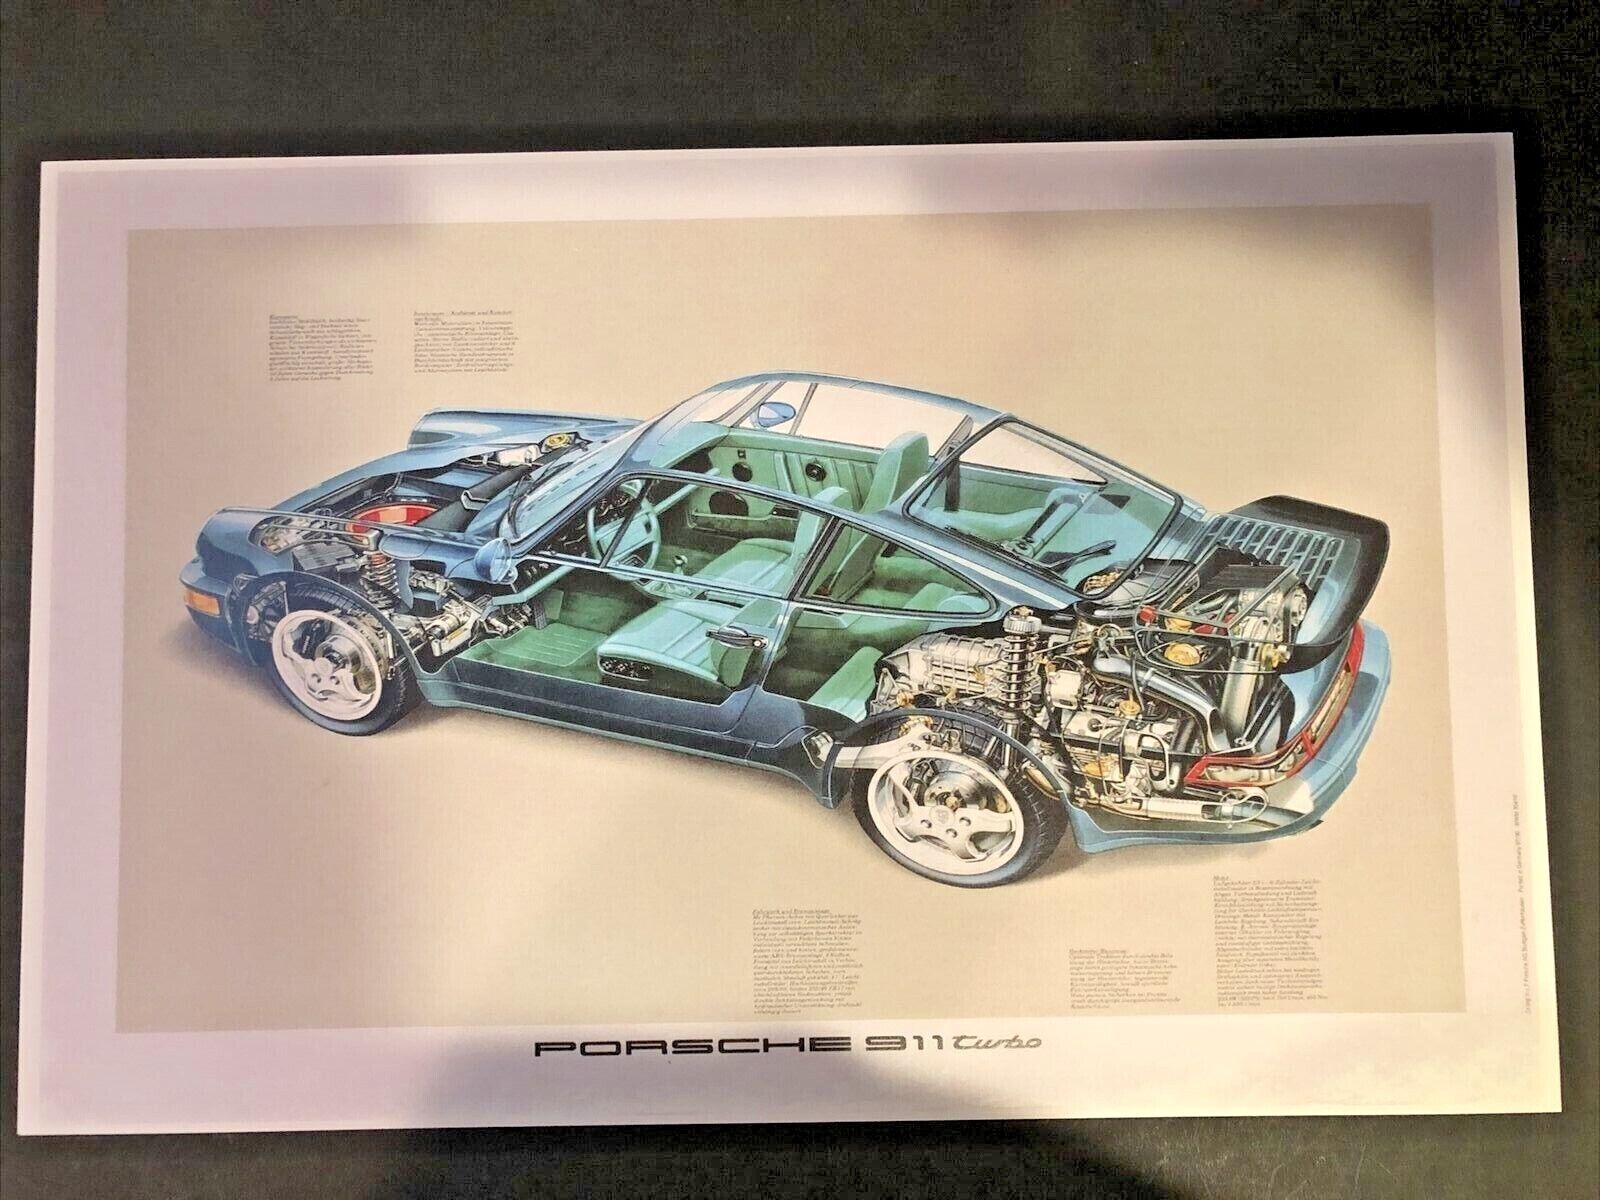 AWESOME Porsche 911 Turbo Cut Away poster 17x11